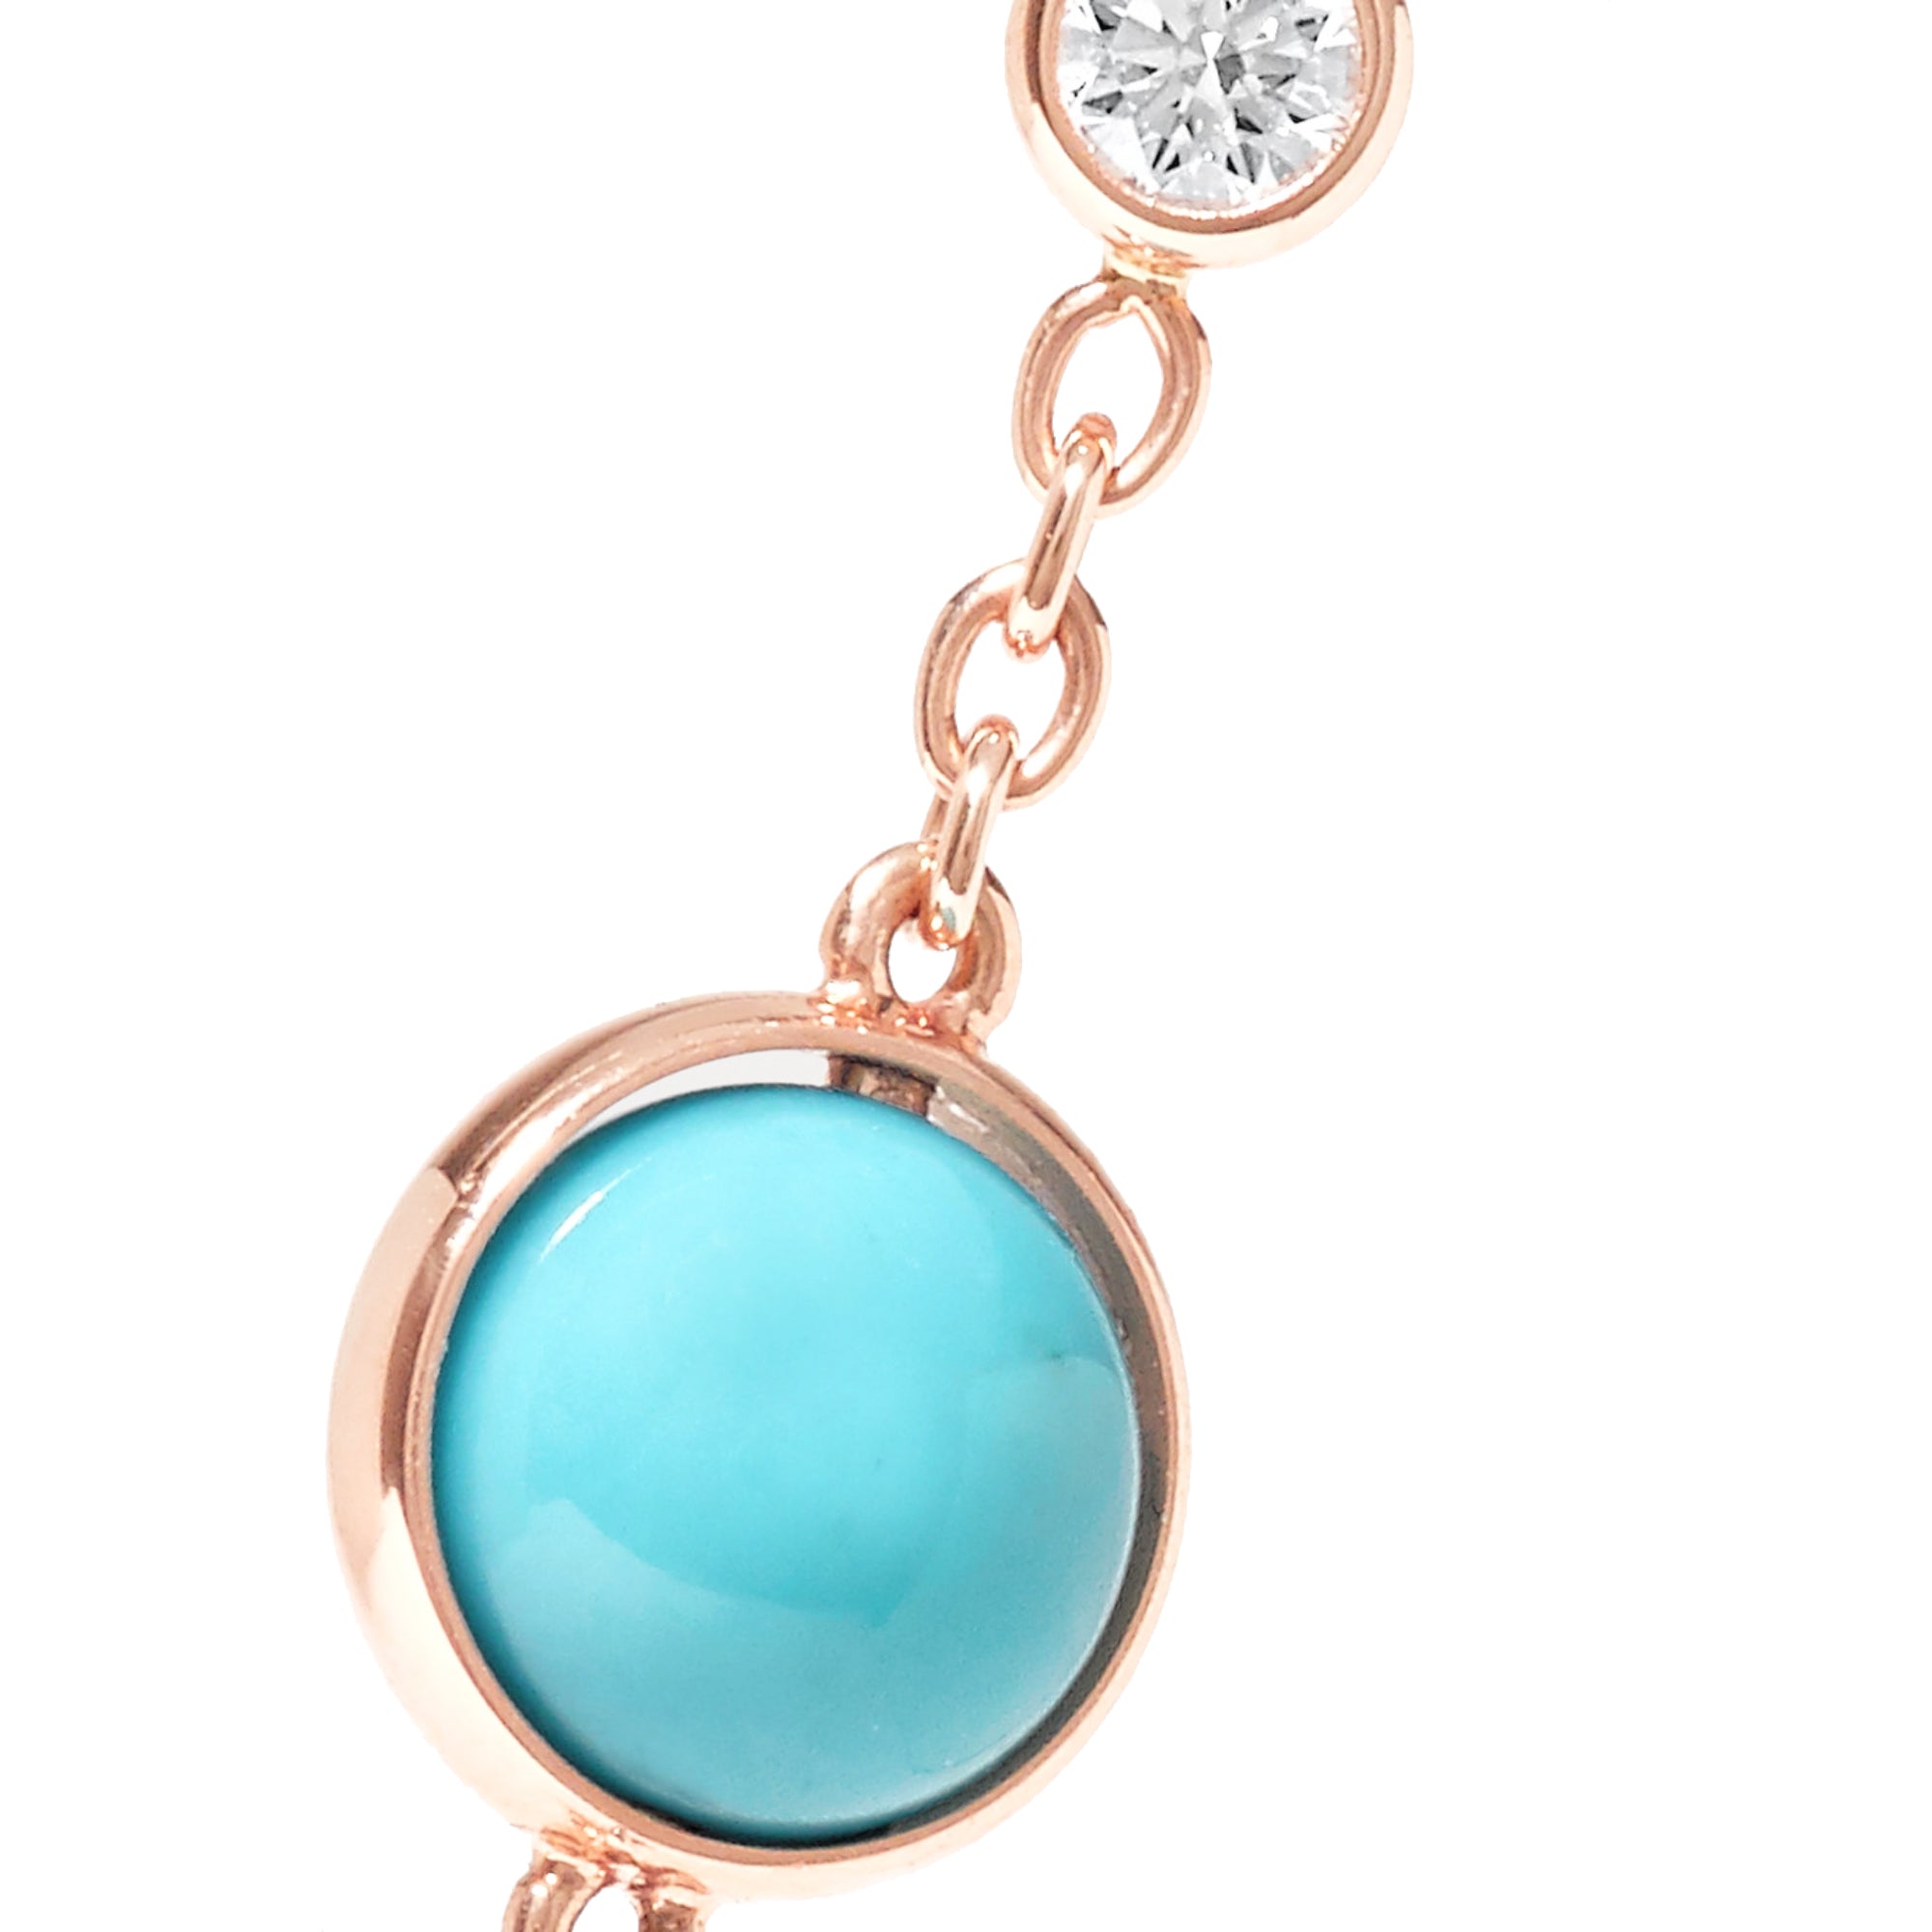 Womens White Gold Plated Rotating Turquoise Bead Chain Bracelet